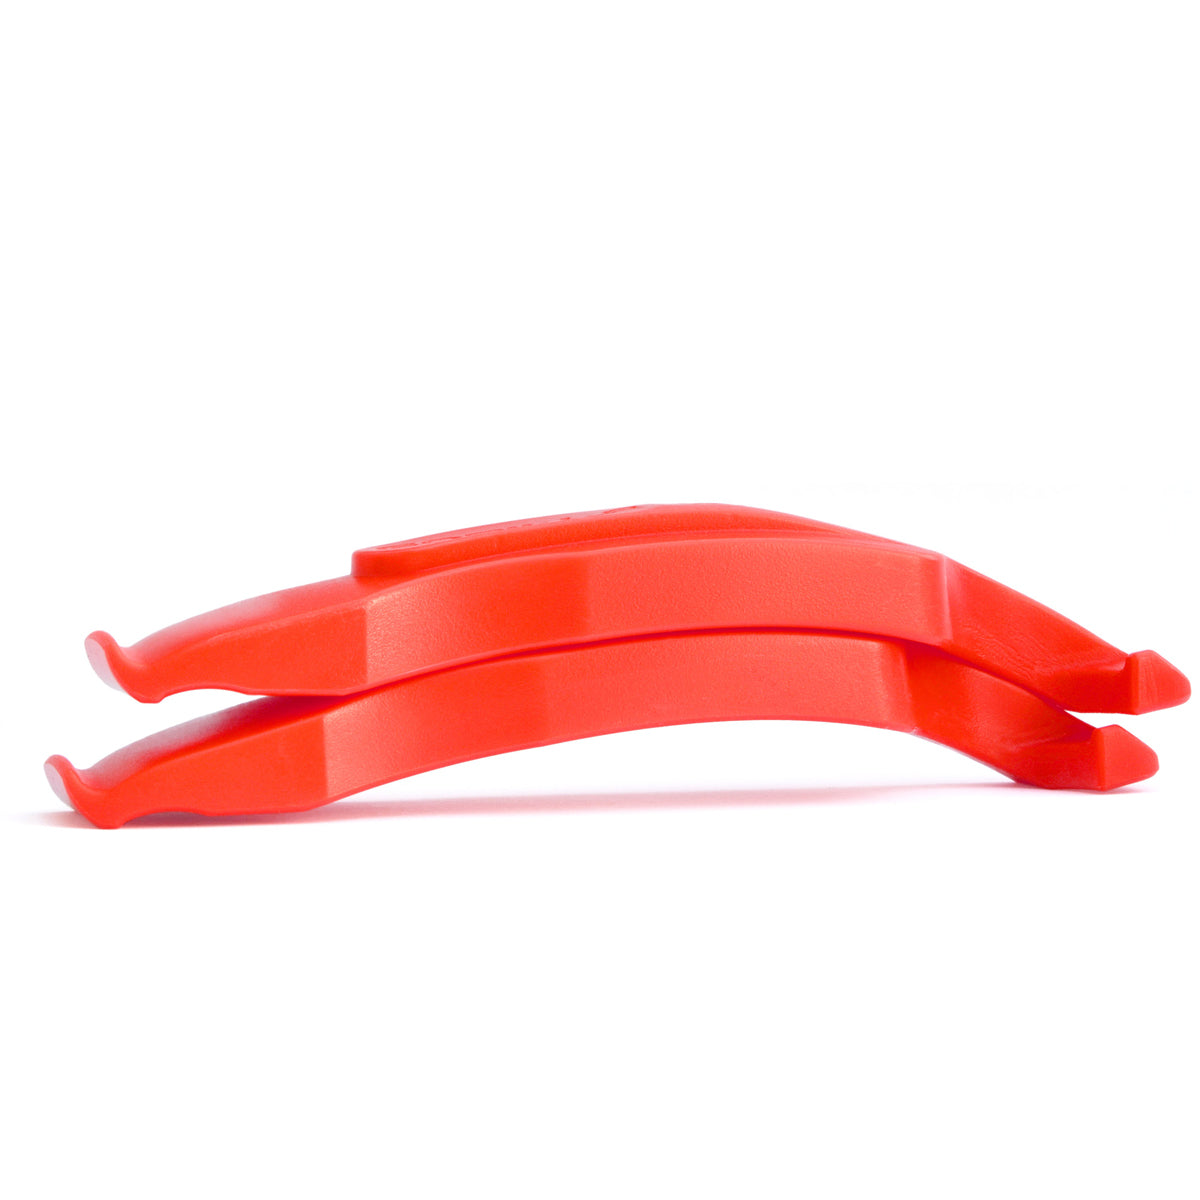 Ultra Strong Bike Tire Levers | Lava Red